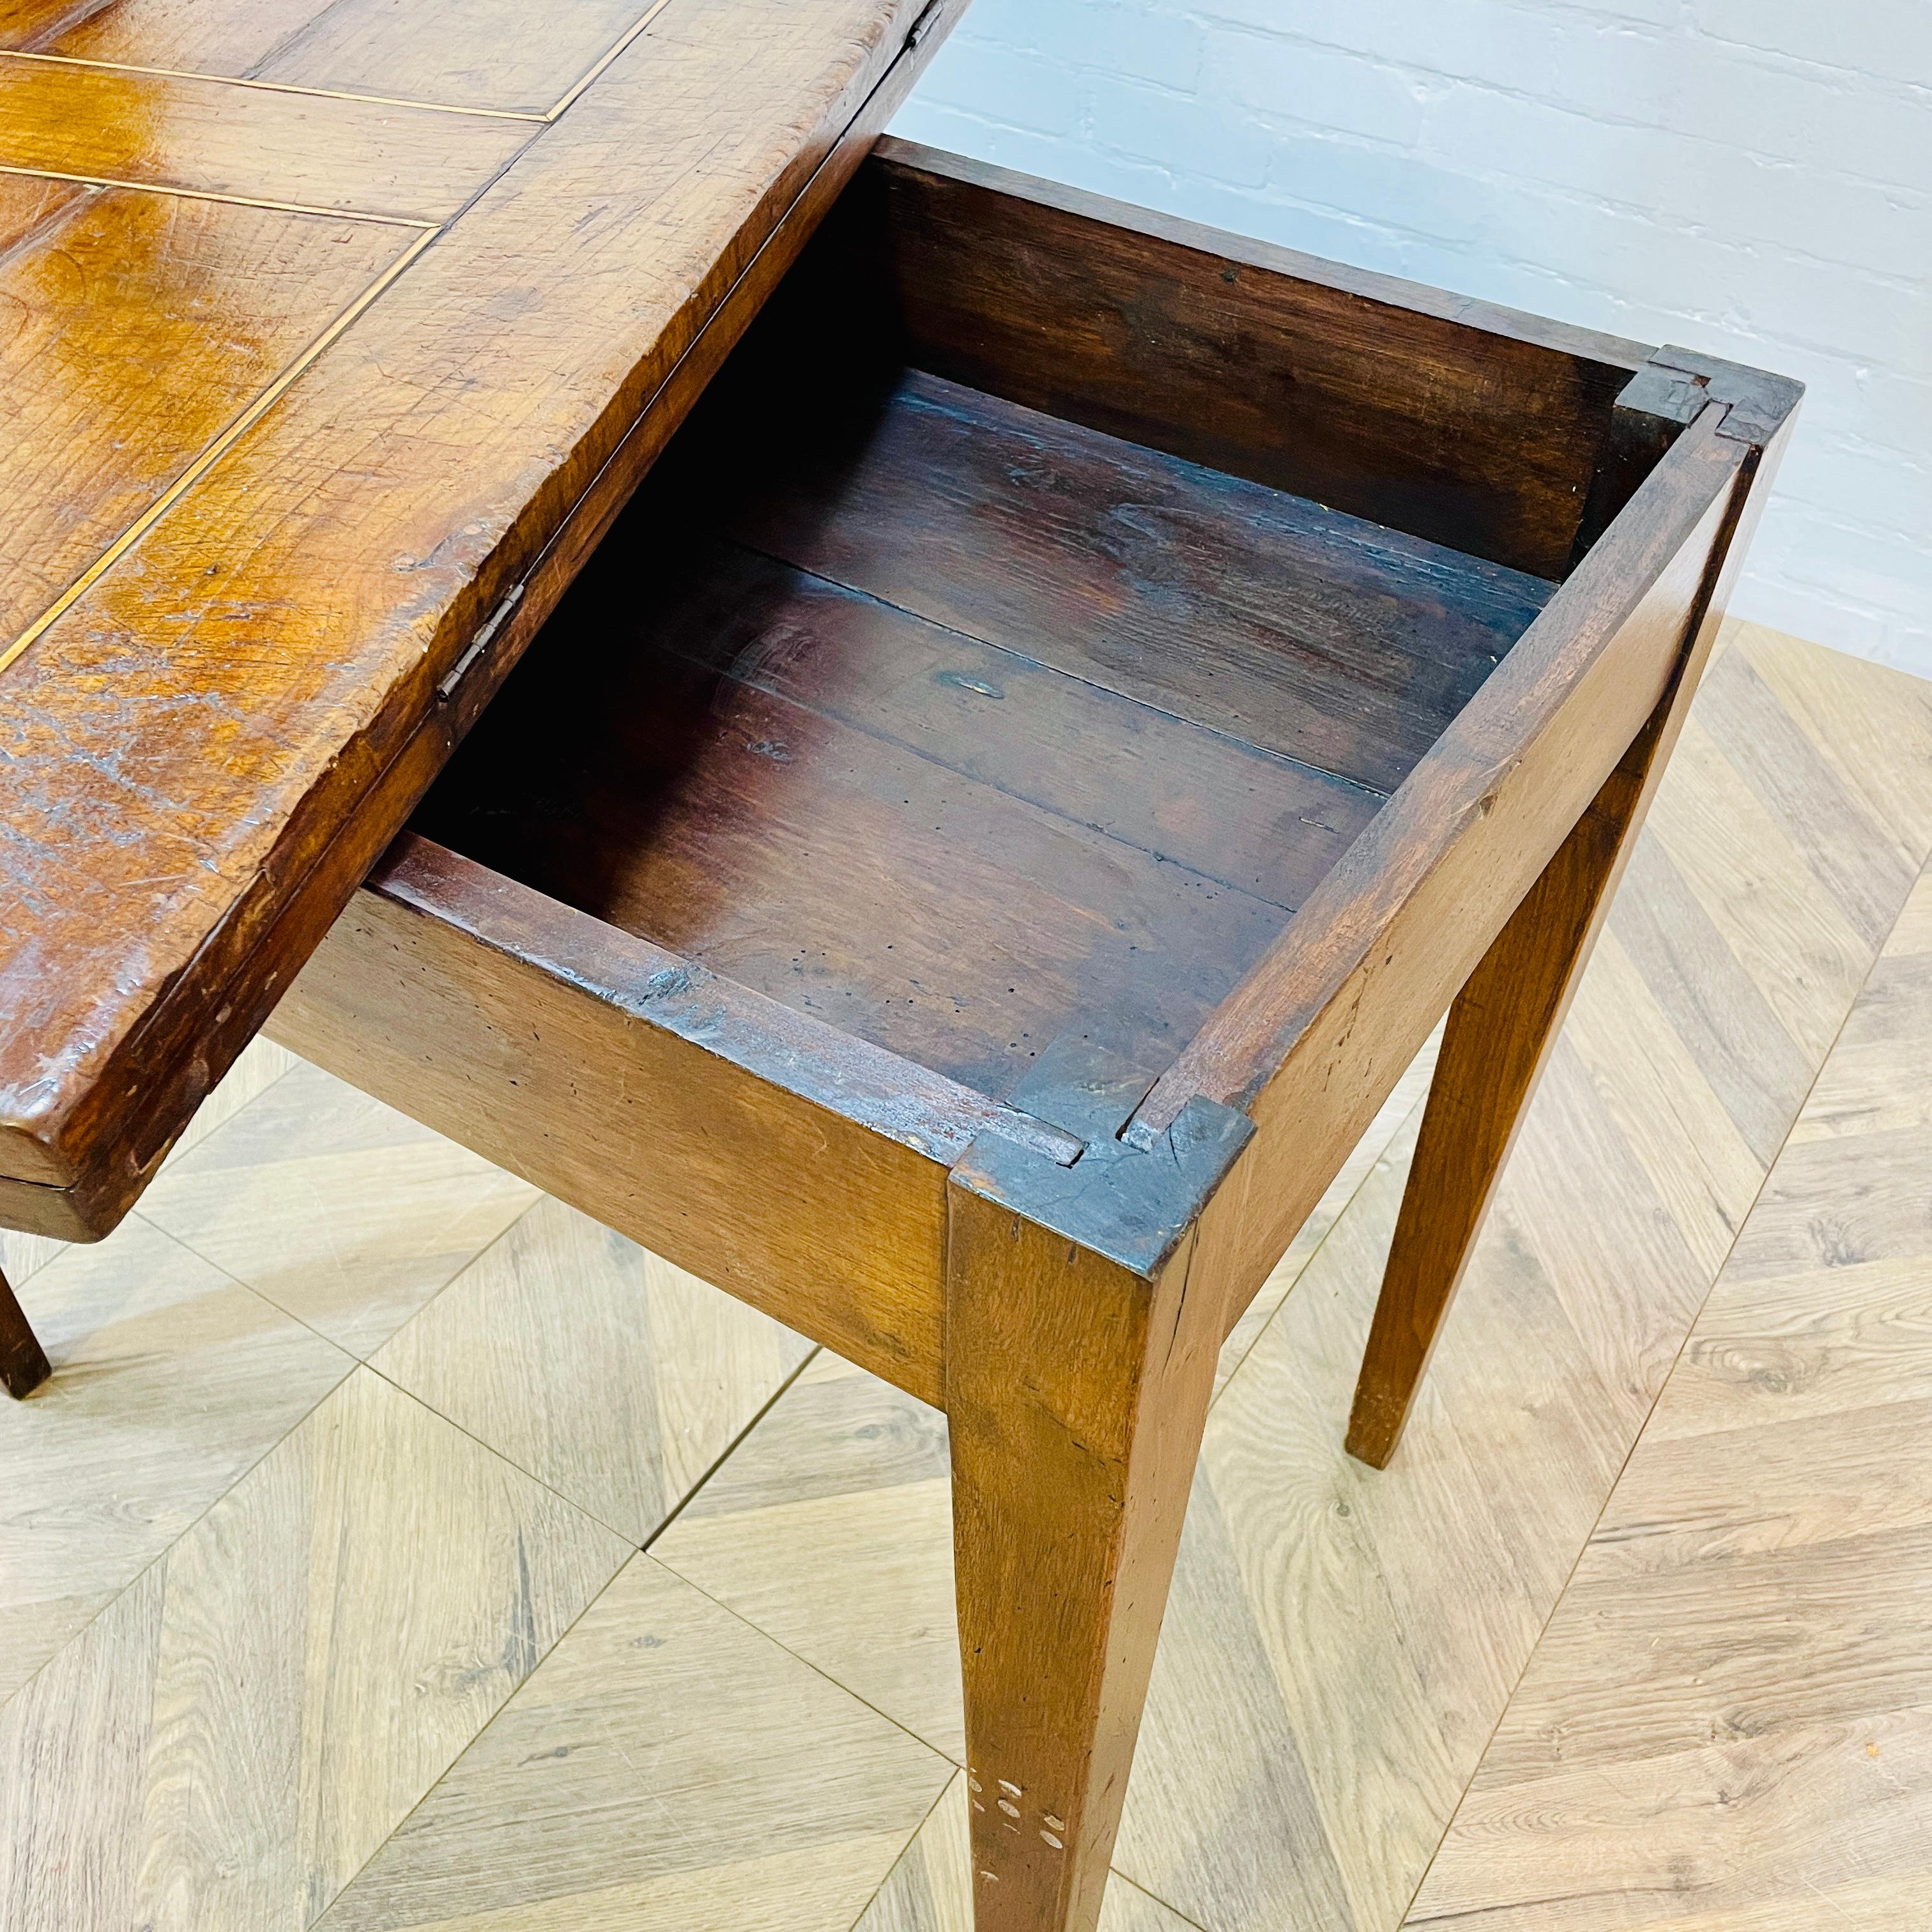 A Lovely English Antique Foldout Tea Table, Georgian Period circa 1790s.

The table, made from mahogany and structurally very strong, boasts additional storage underneath.

The table has a warm patina, but is showing wear to the table tops, but it 